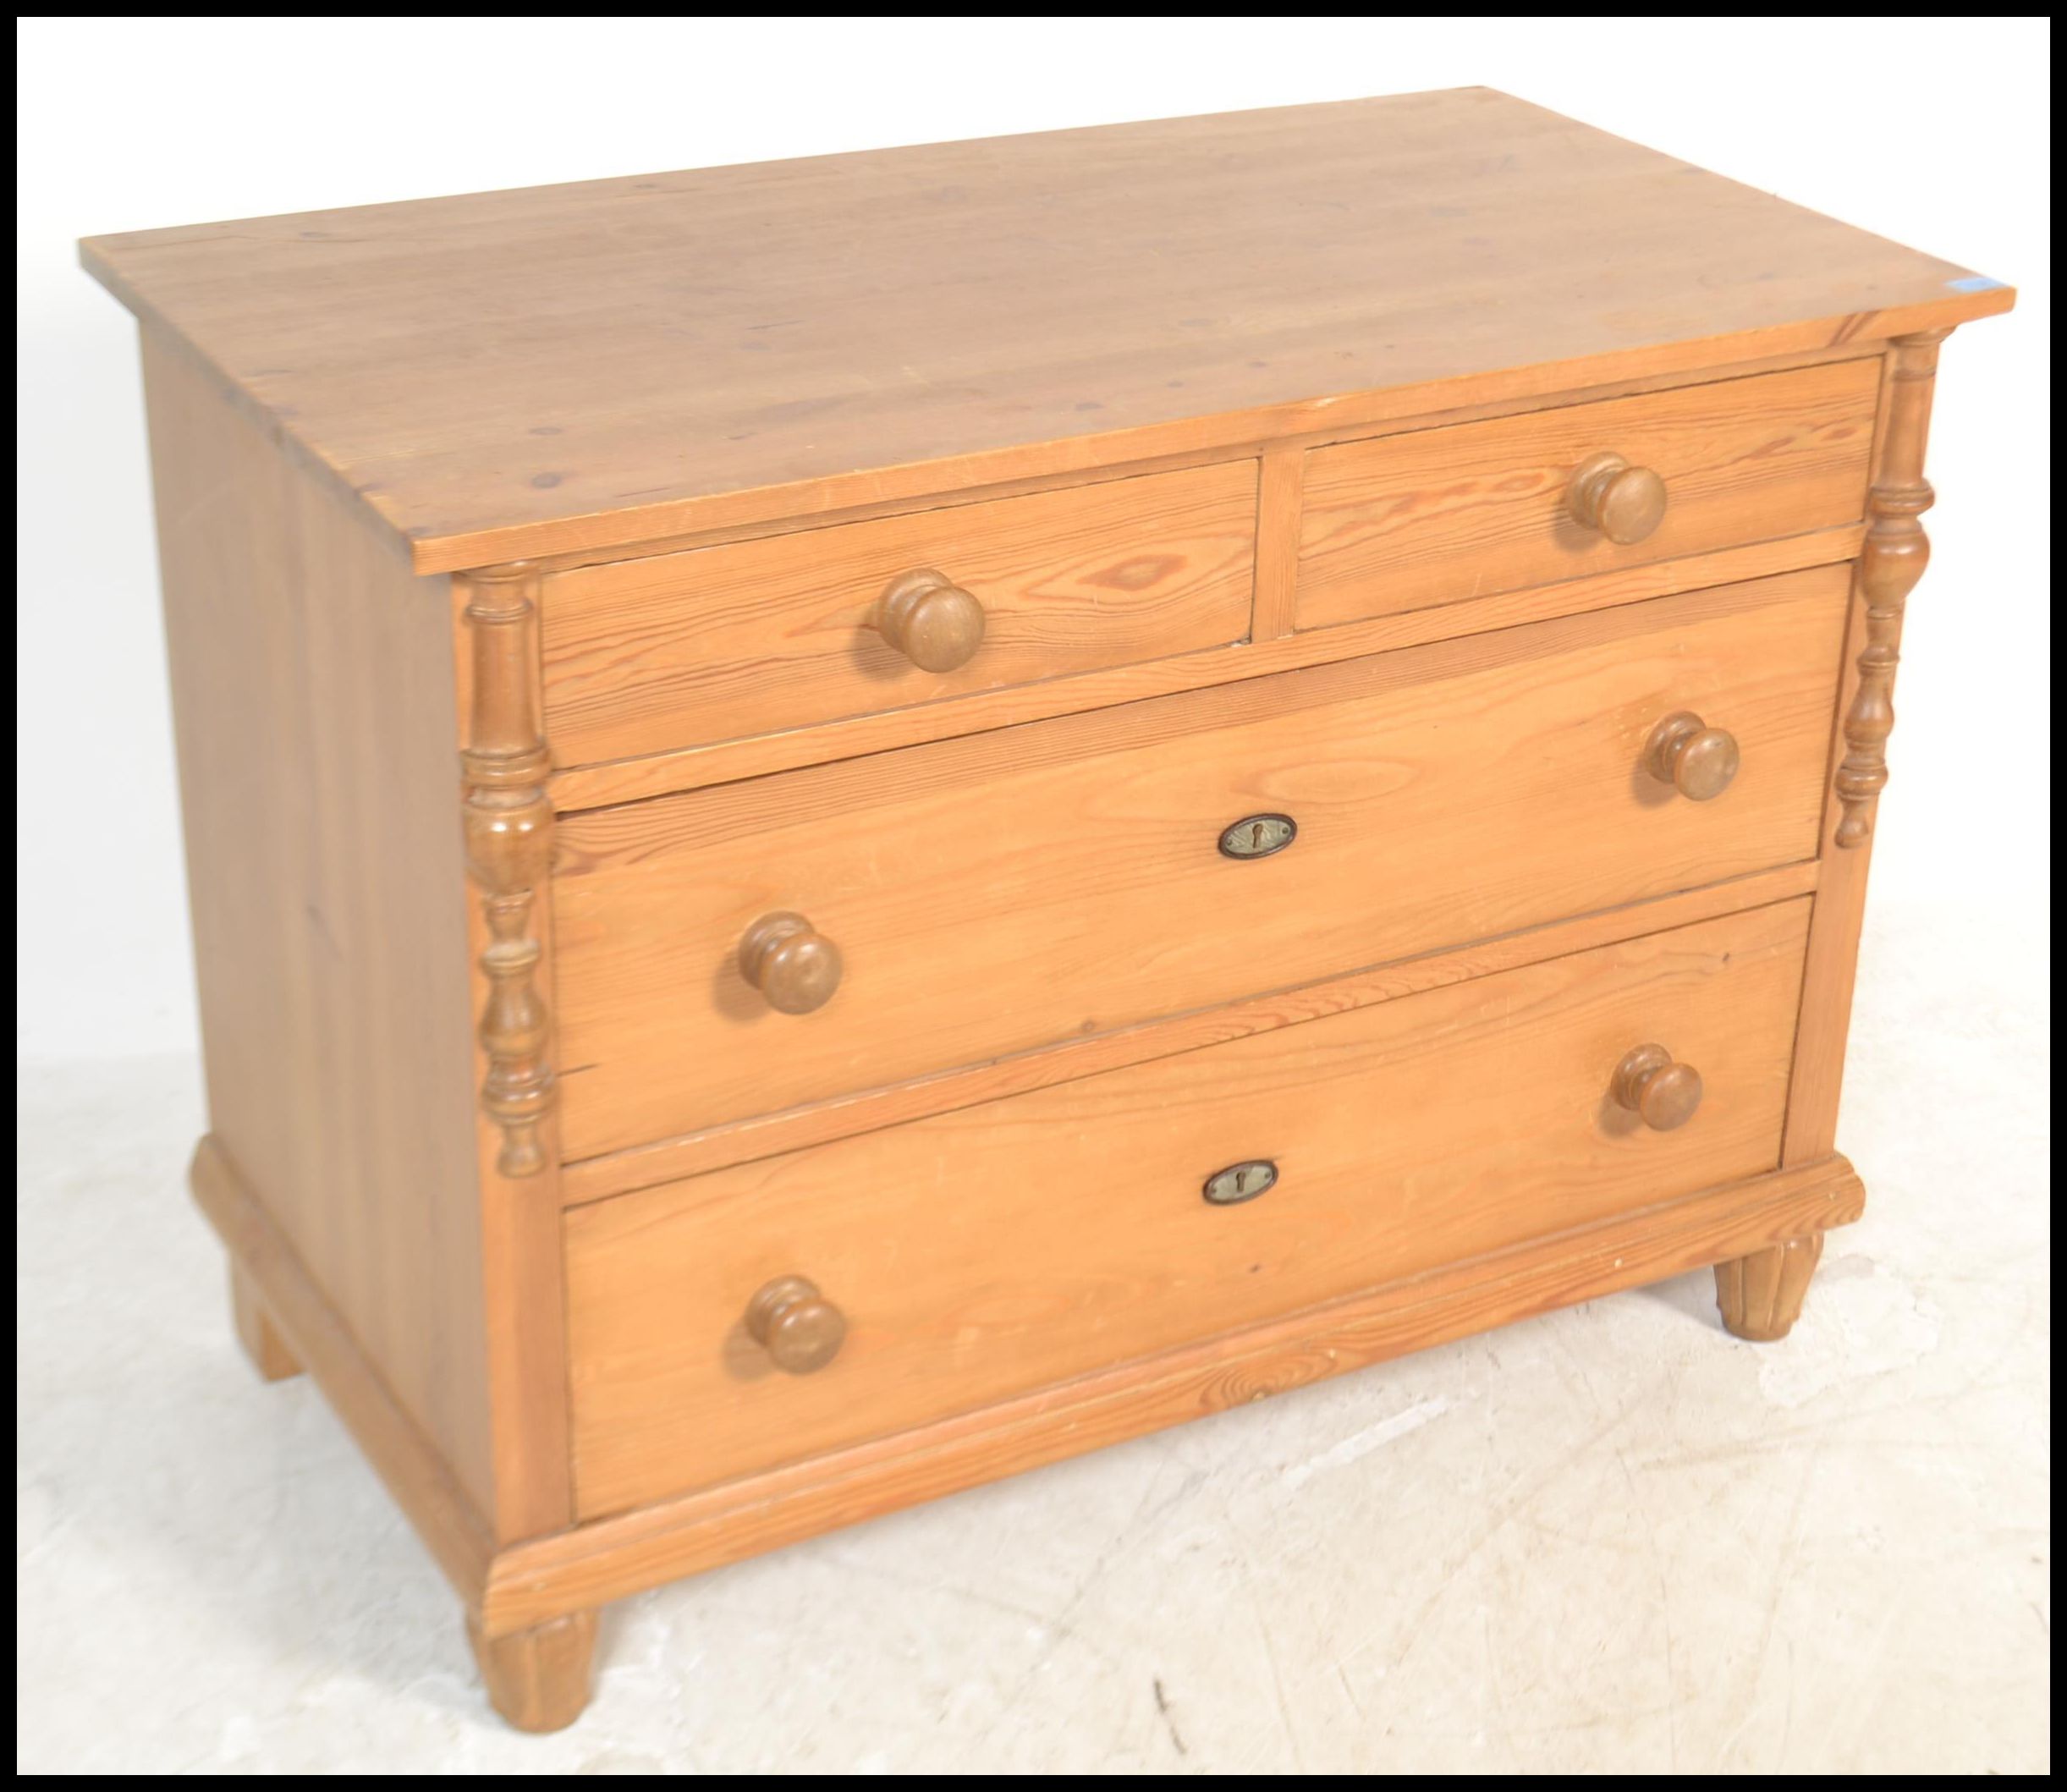 An antique style Scandinavian pine chest of drawers having 2 short and 2 deep drawers with flared - Image 2 of 4